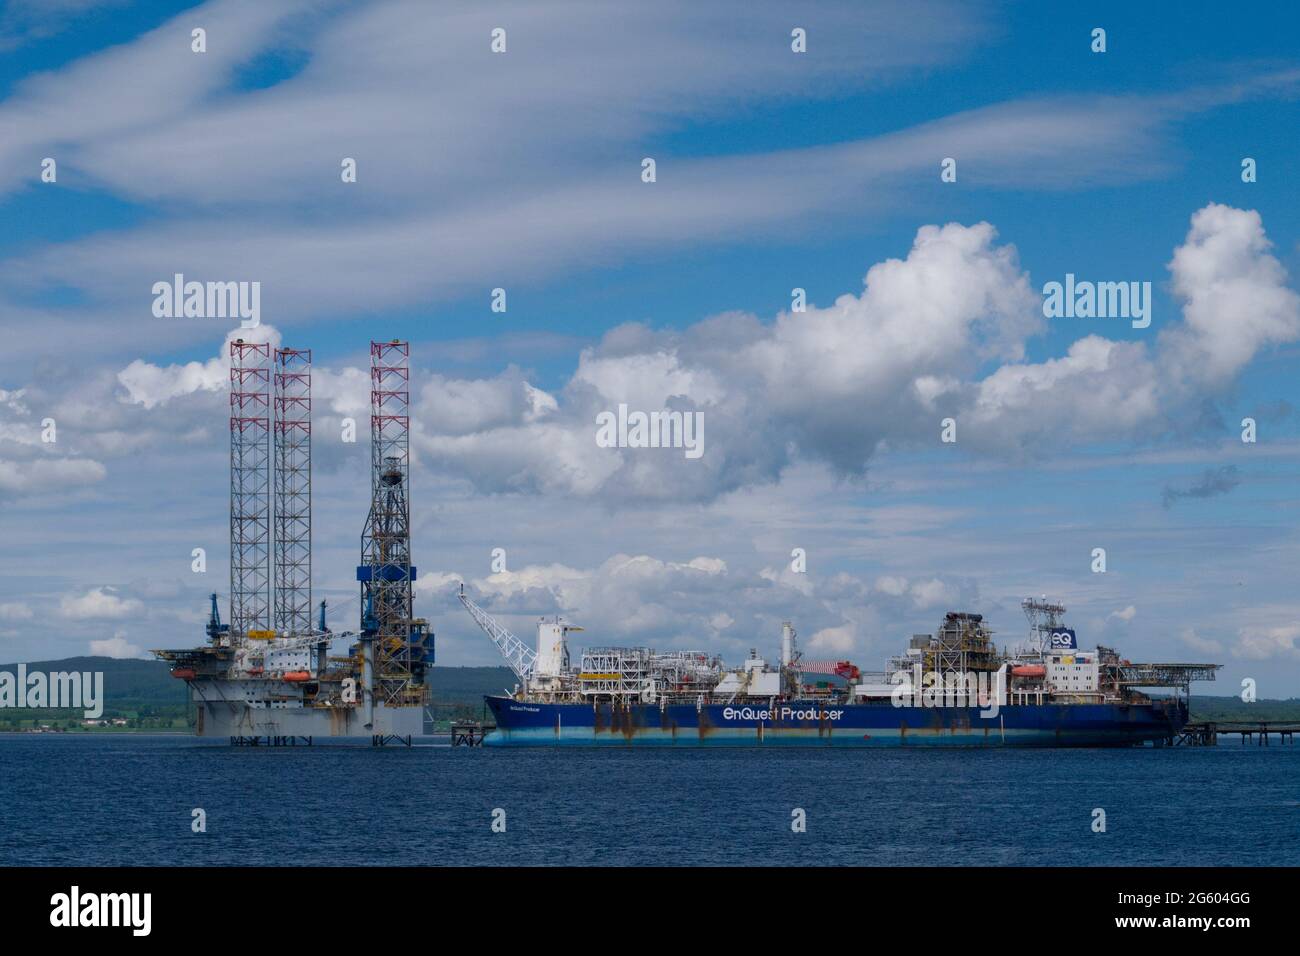 Enquest Producer oil production vessel at Nigg Port, Highland Stock Photo